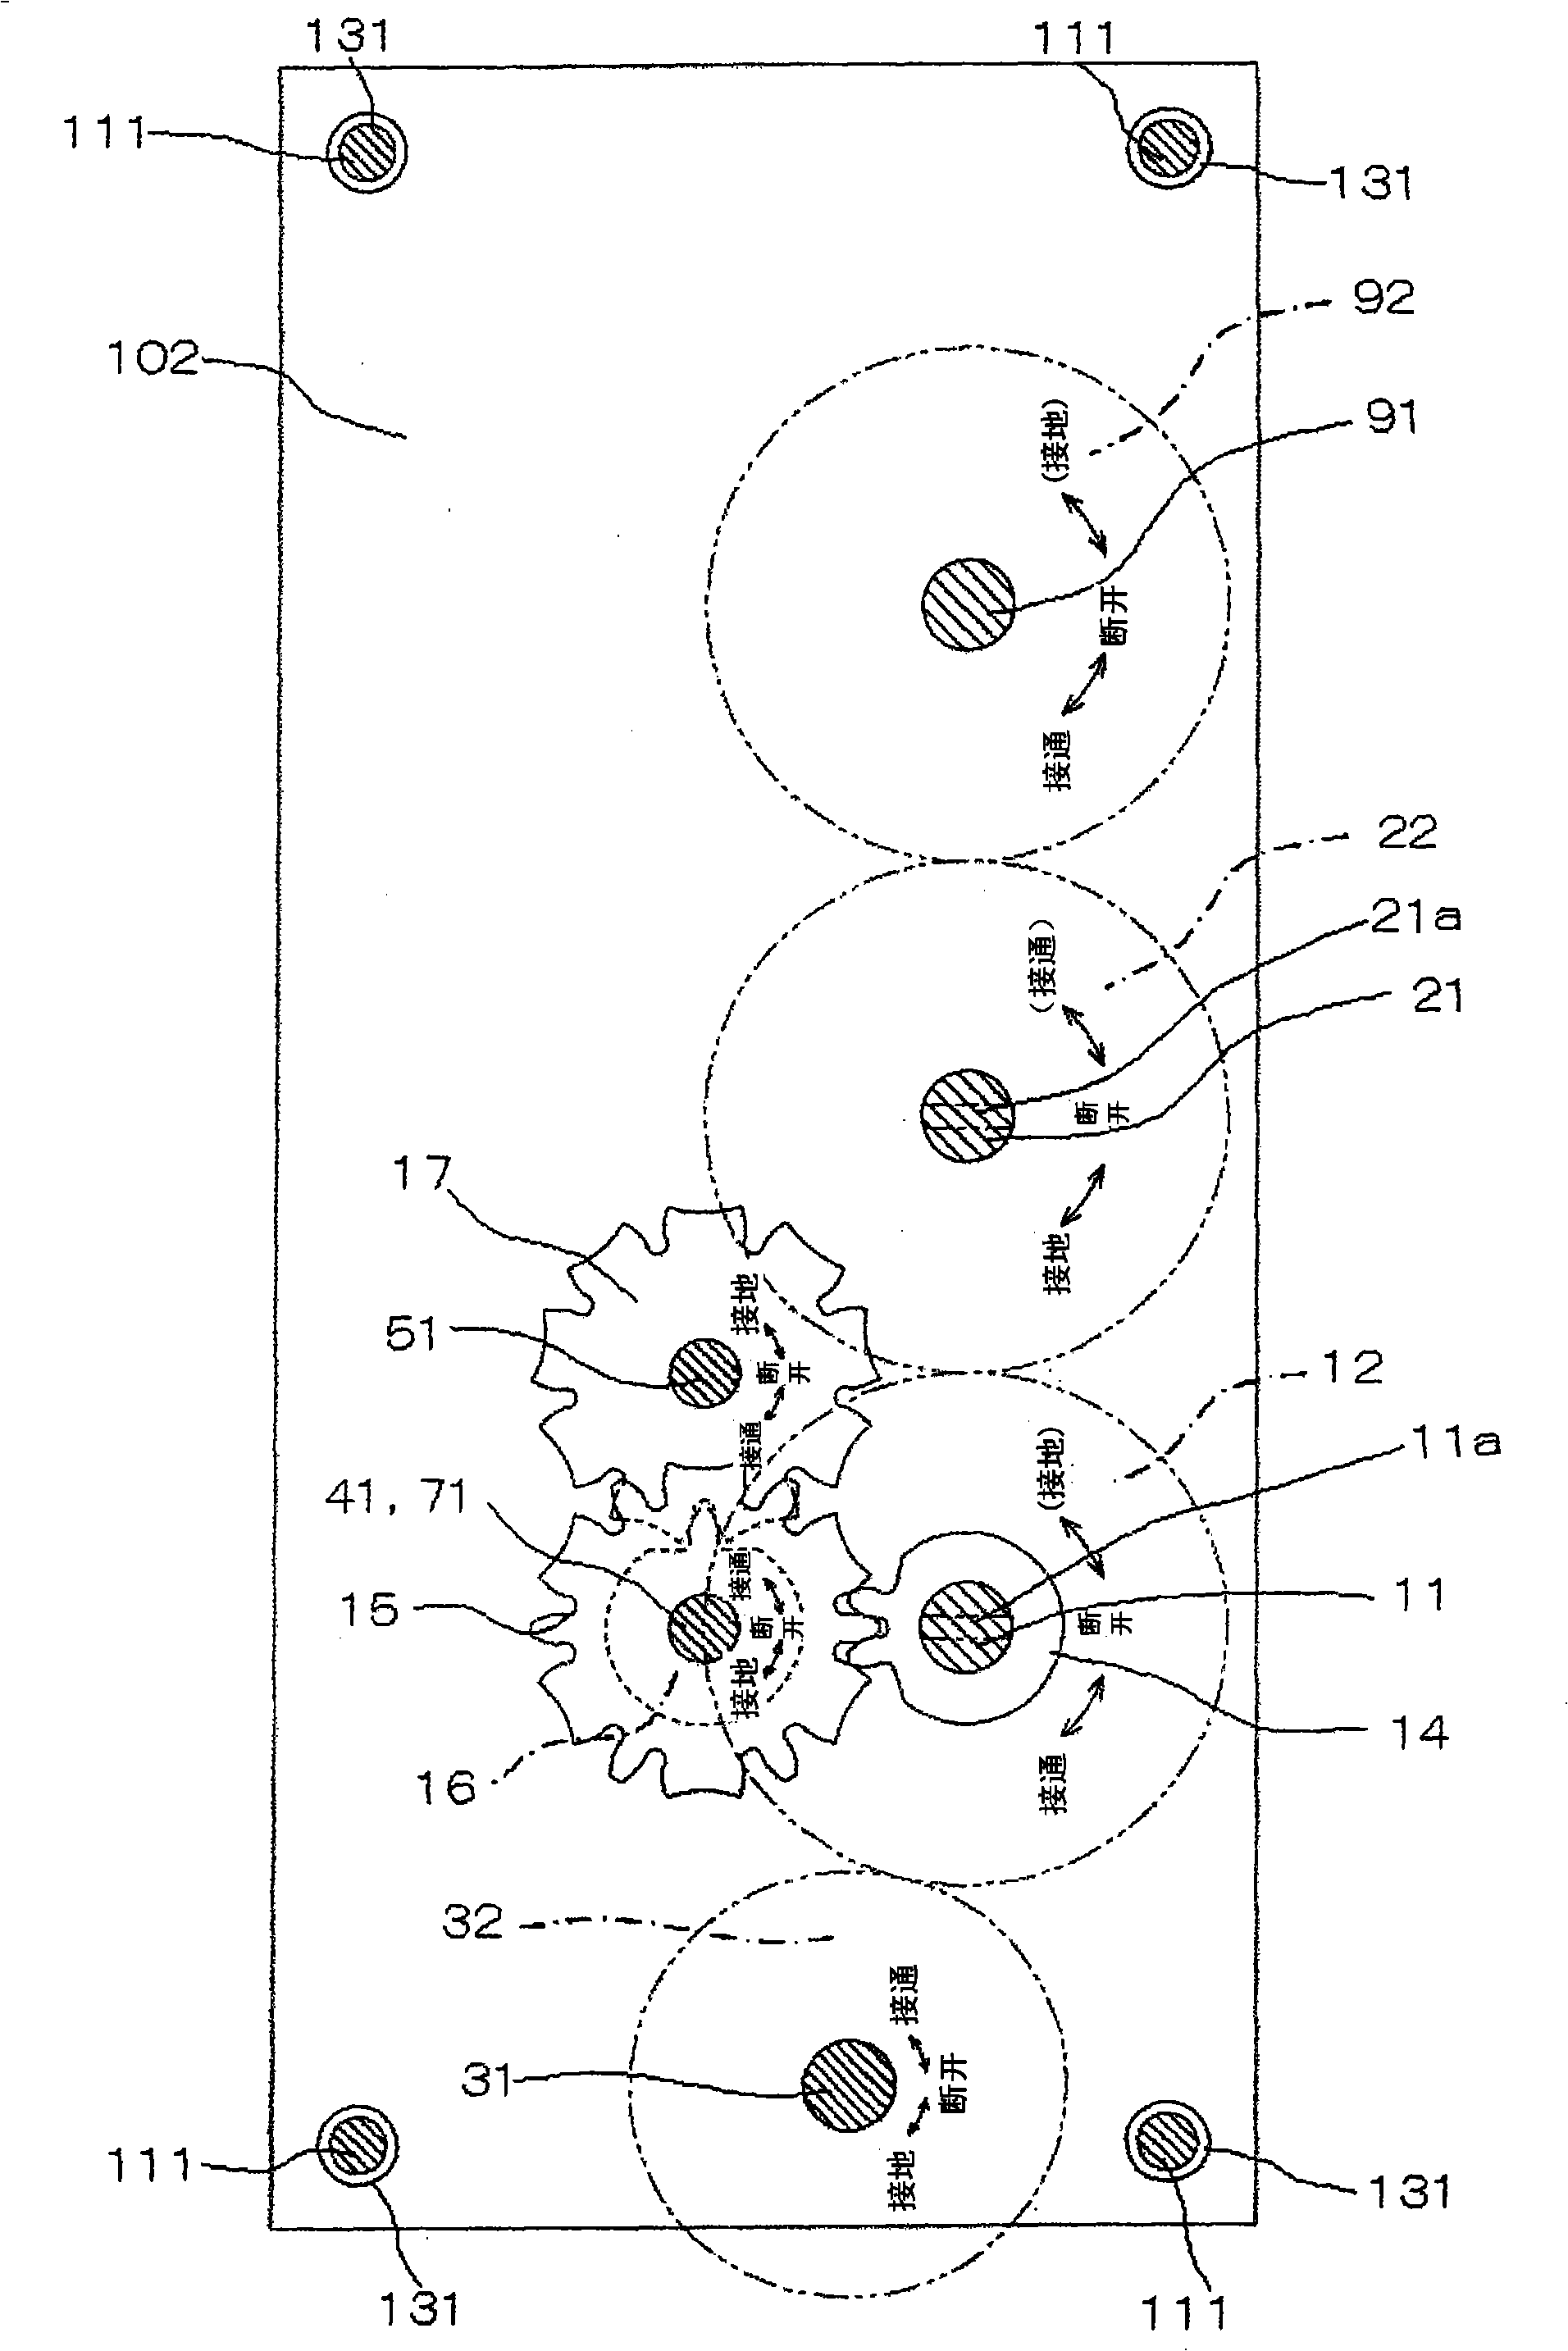 Operation apparatus for three-position switch